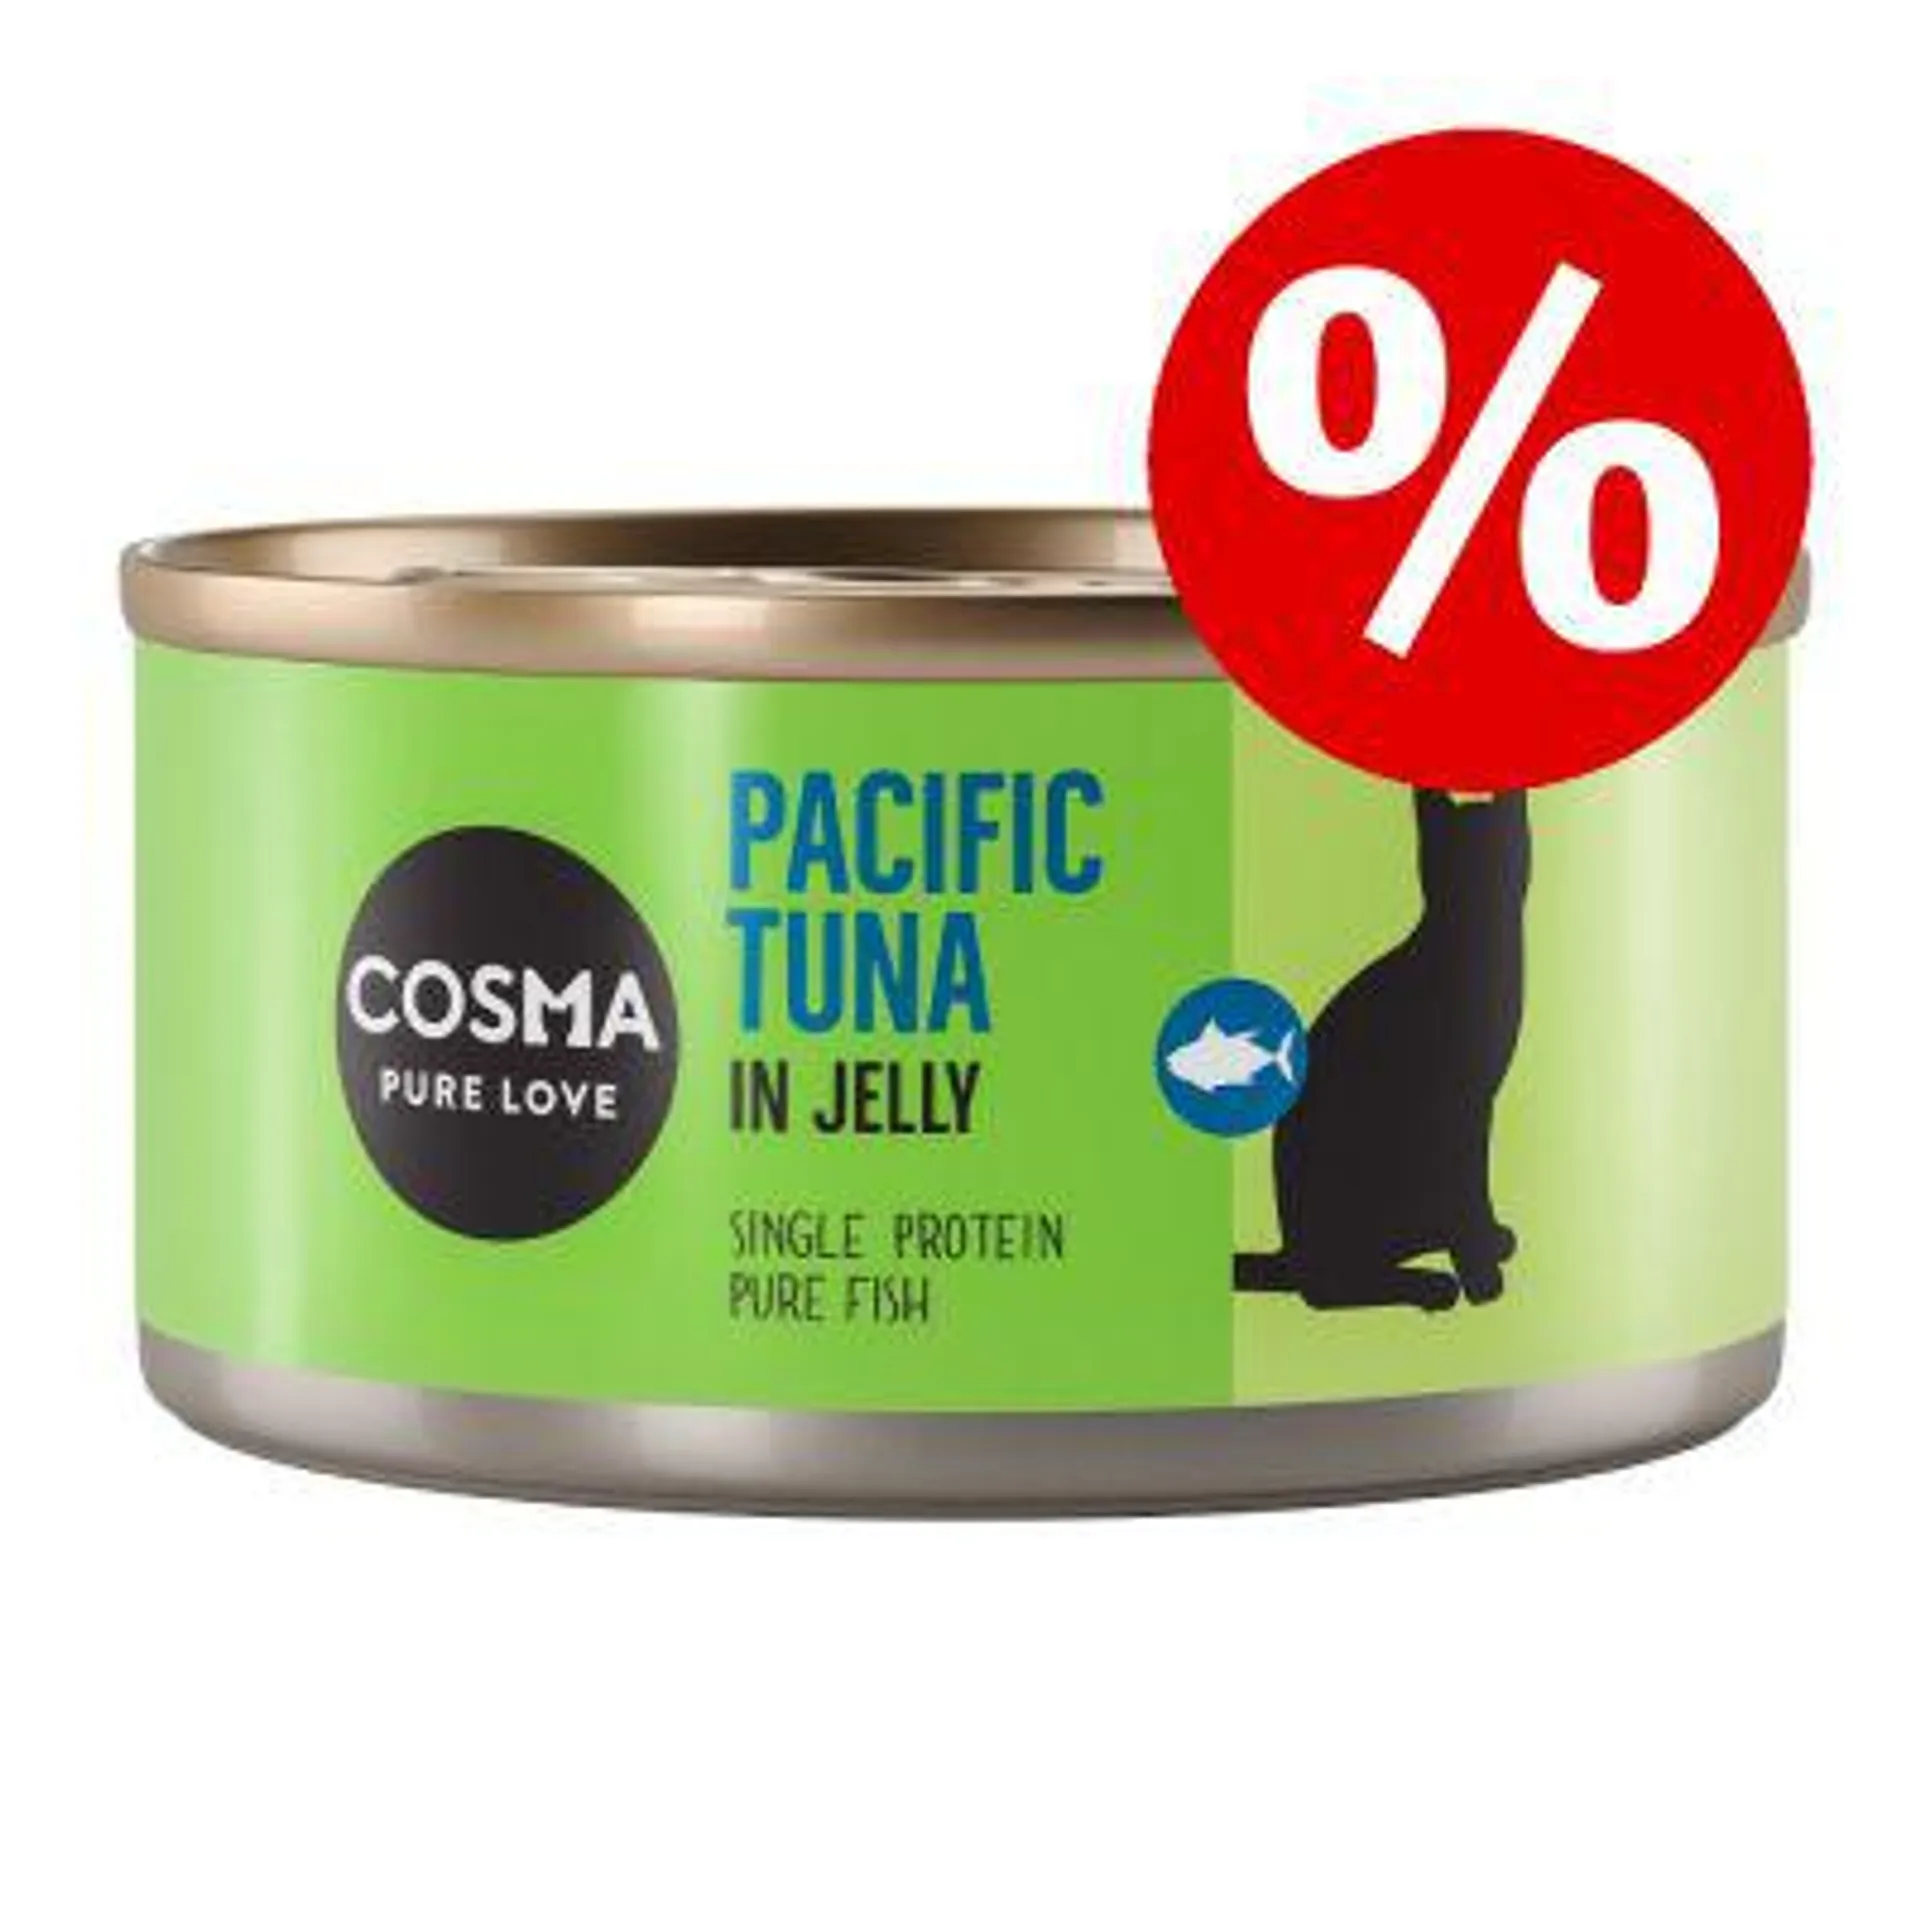 6 x 170g Cosma Original & Asia in Jelly Wet Cat Food - Special Price!*